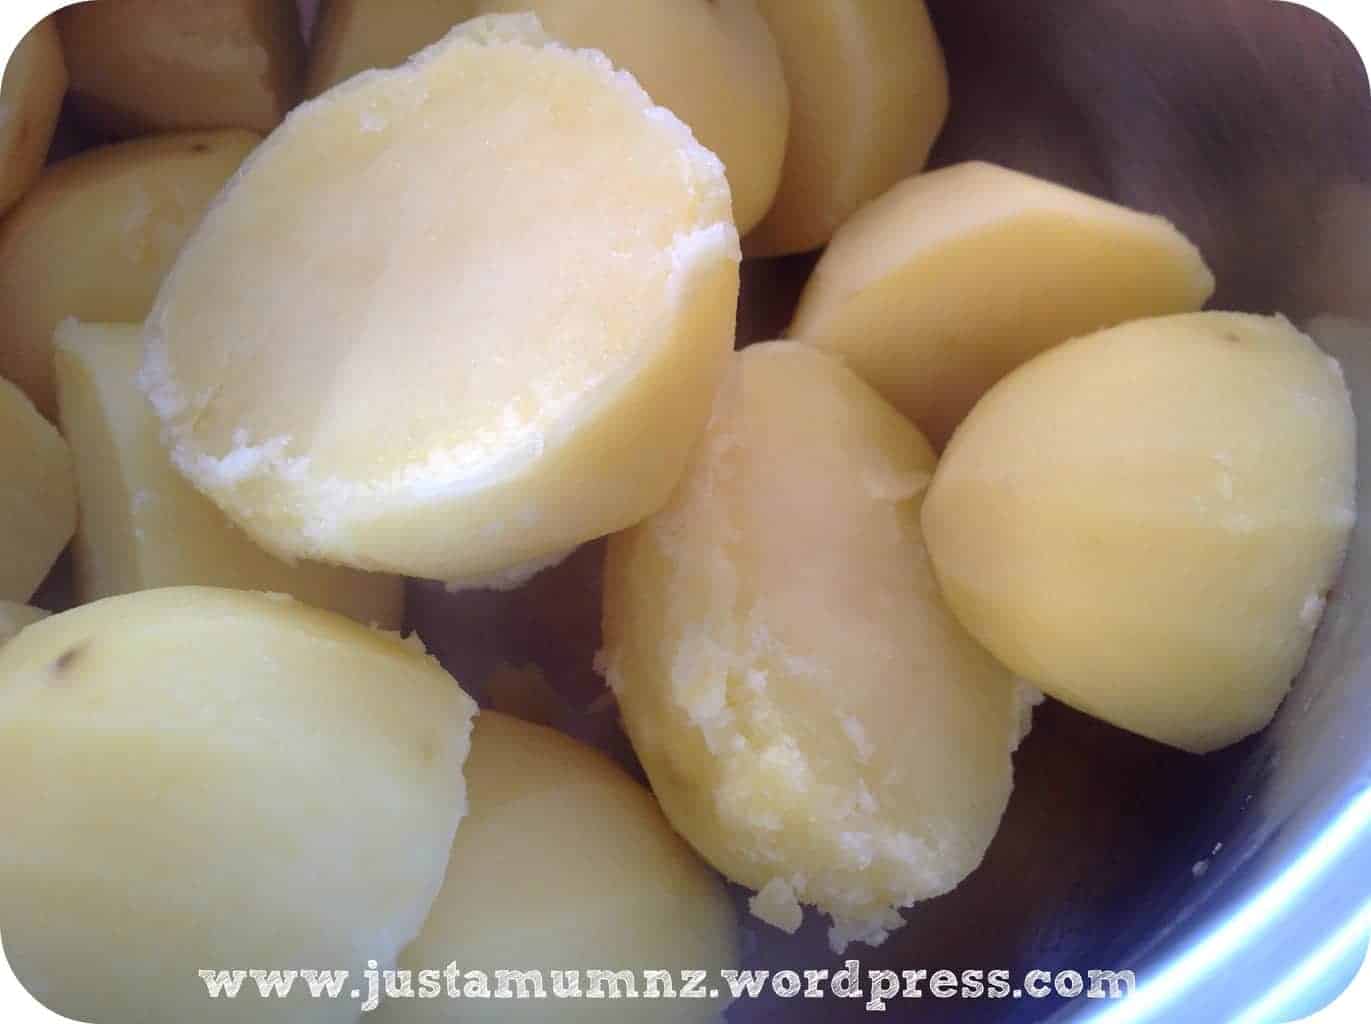 Par Boil the Potatoes first before roasting